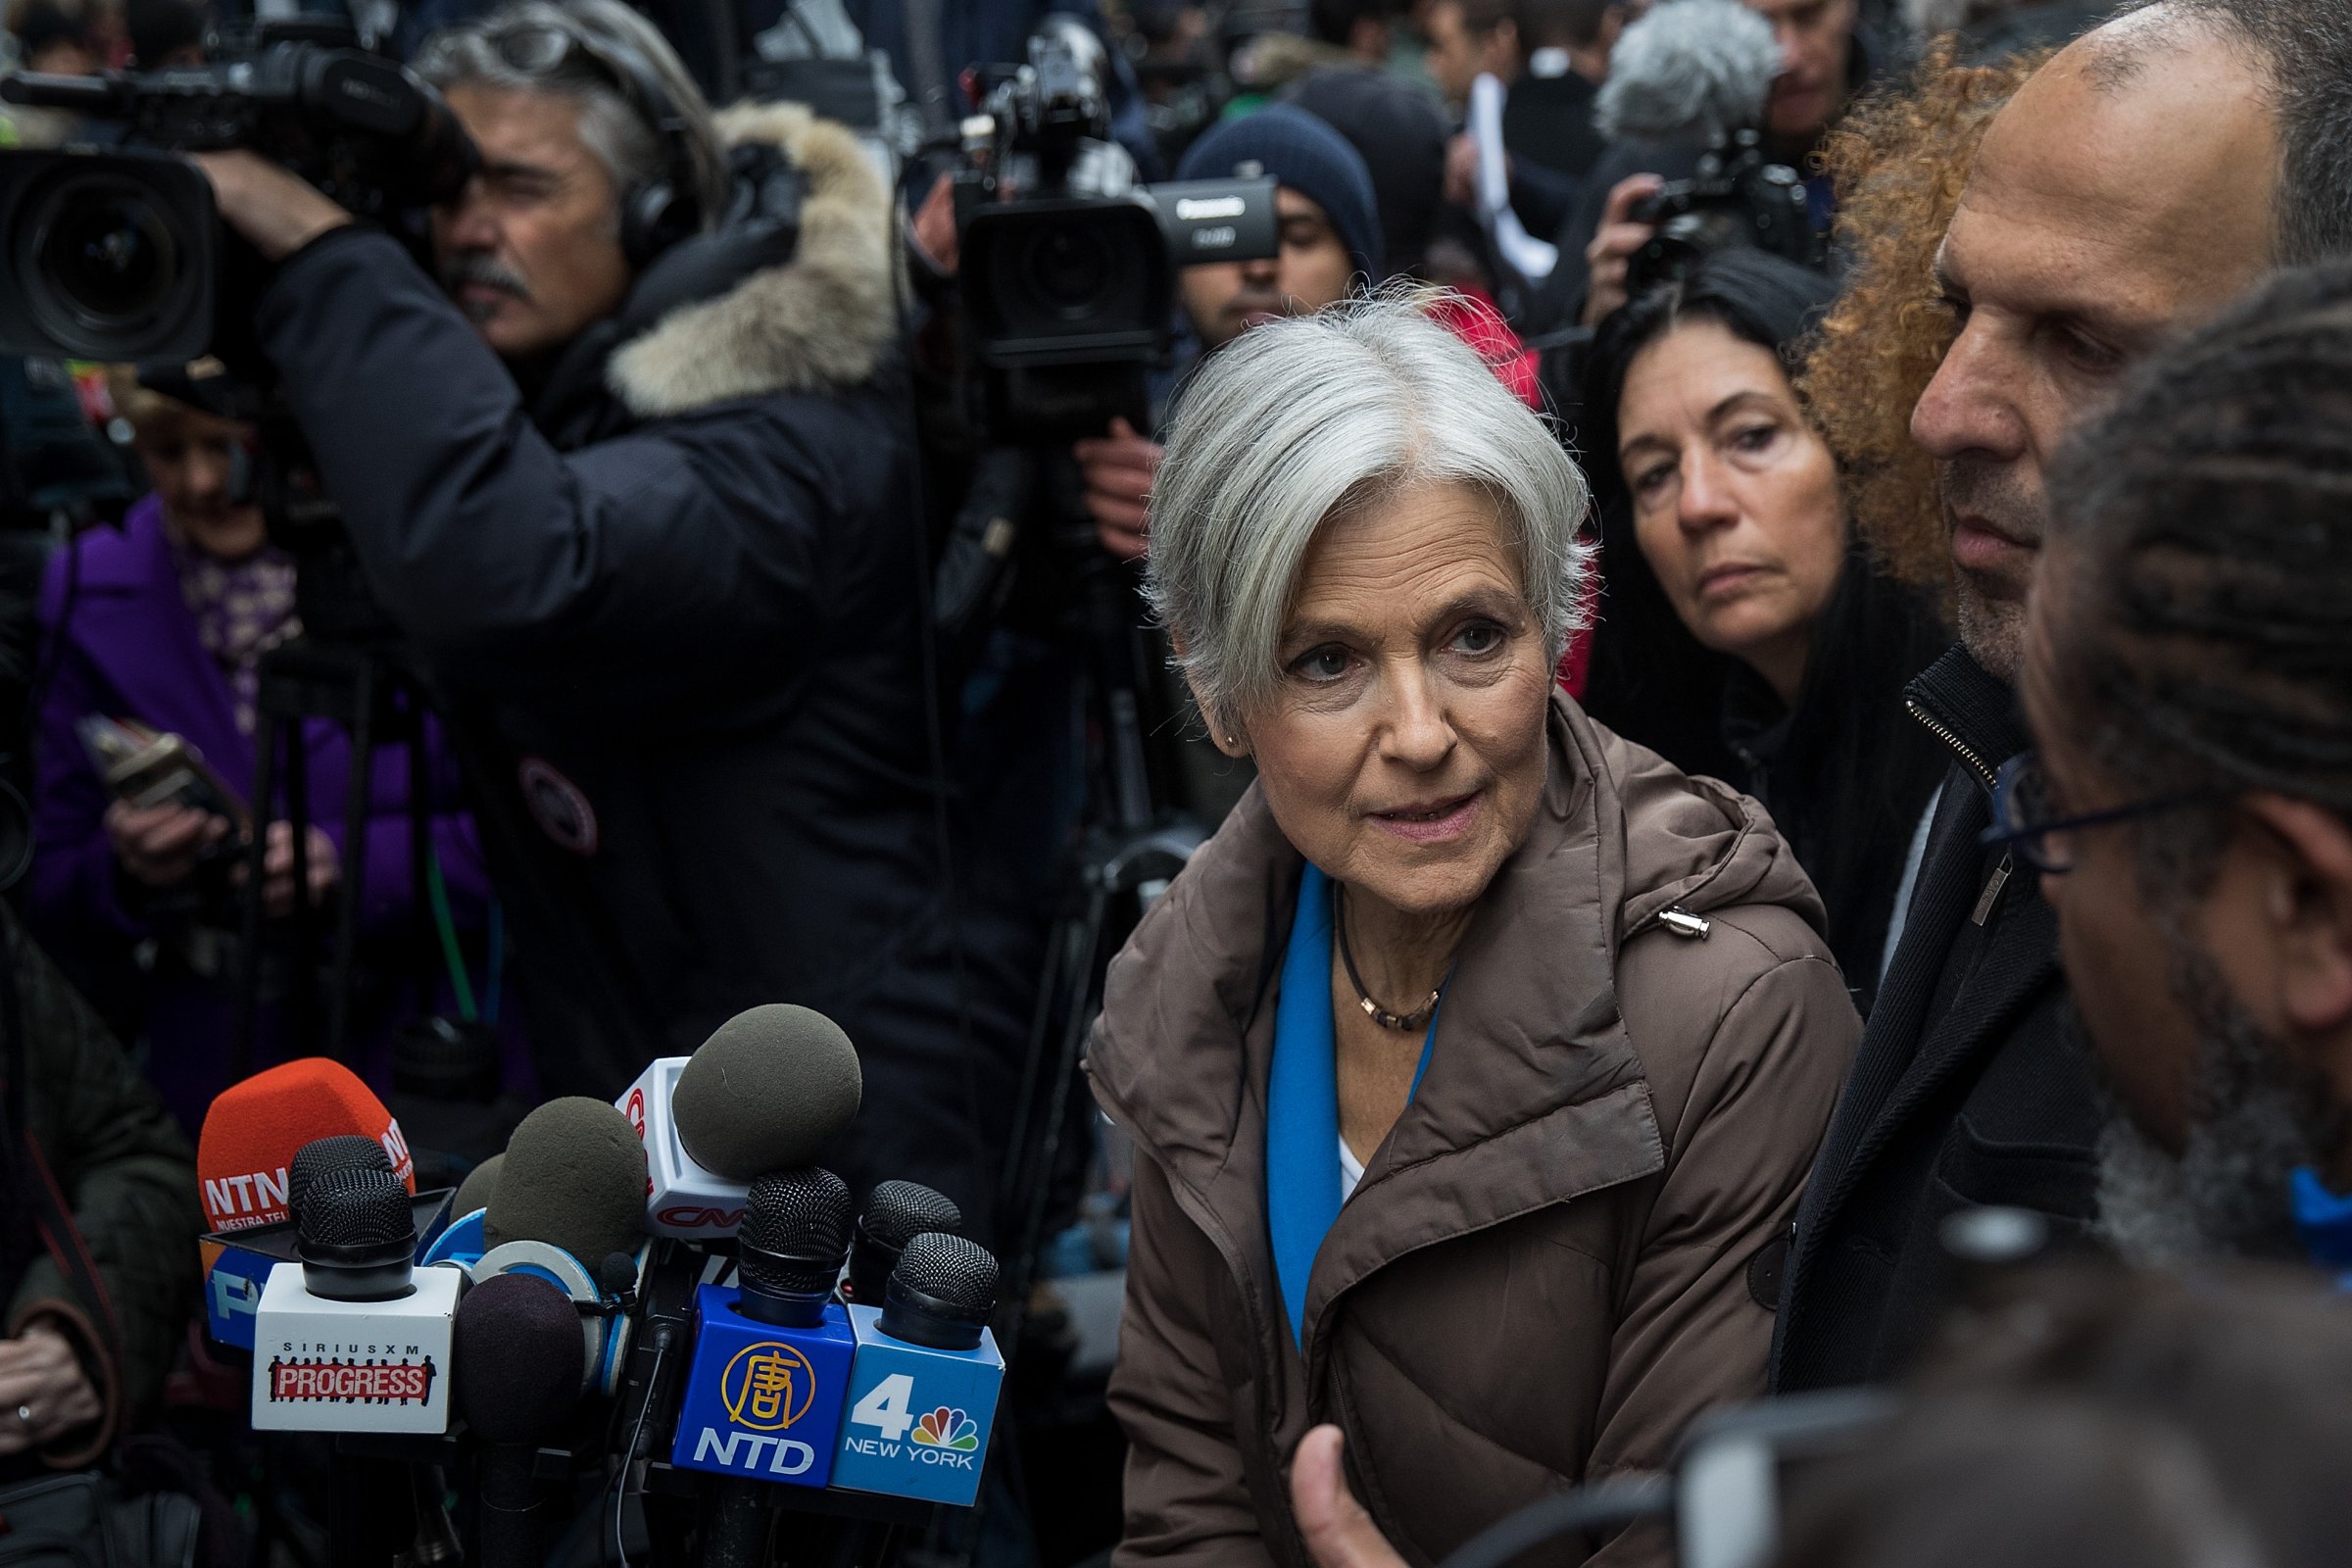 Green Party presidential candidate Jill Stein speaks at a news conference on Fifth Avenue across the street from Trump Tower December 5, 2016 in New York City.